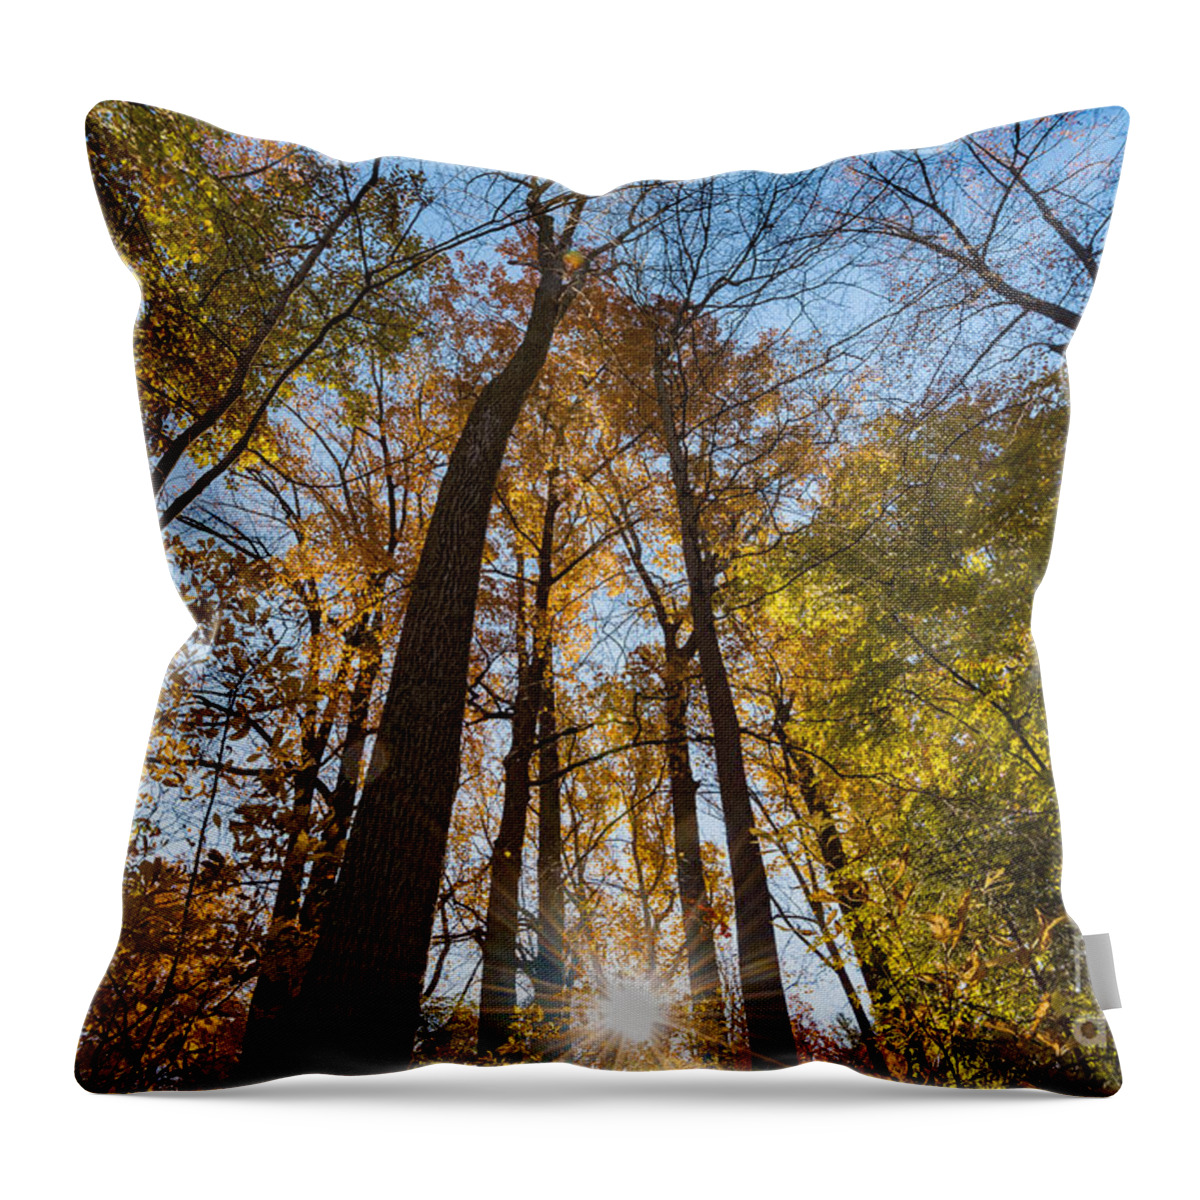 Fall Throw Pillow featuring the photograph Sunburst through Autumn Trees by Alissa Beth Photography